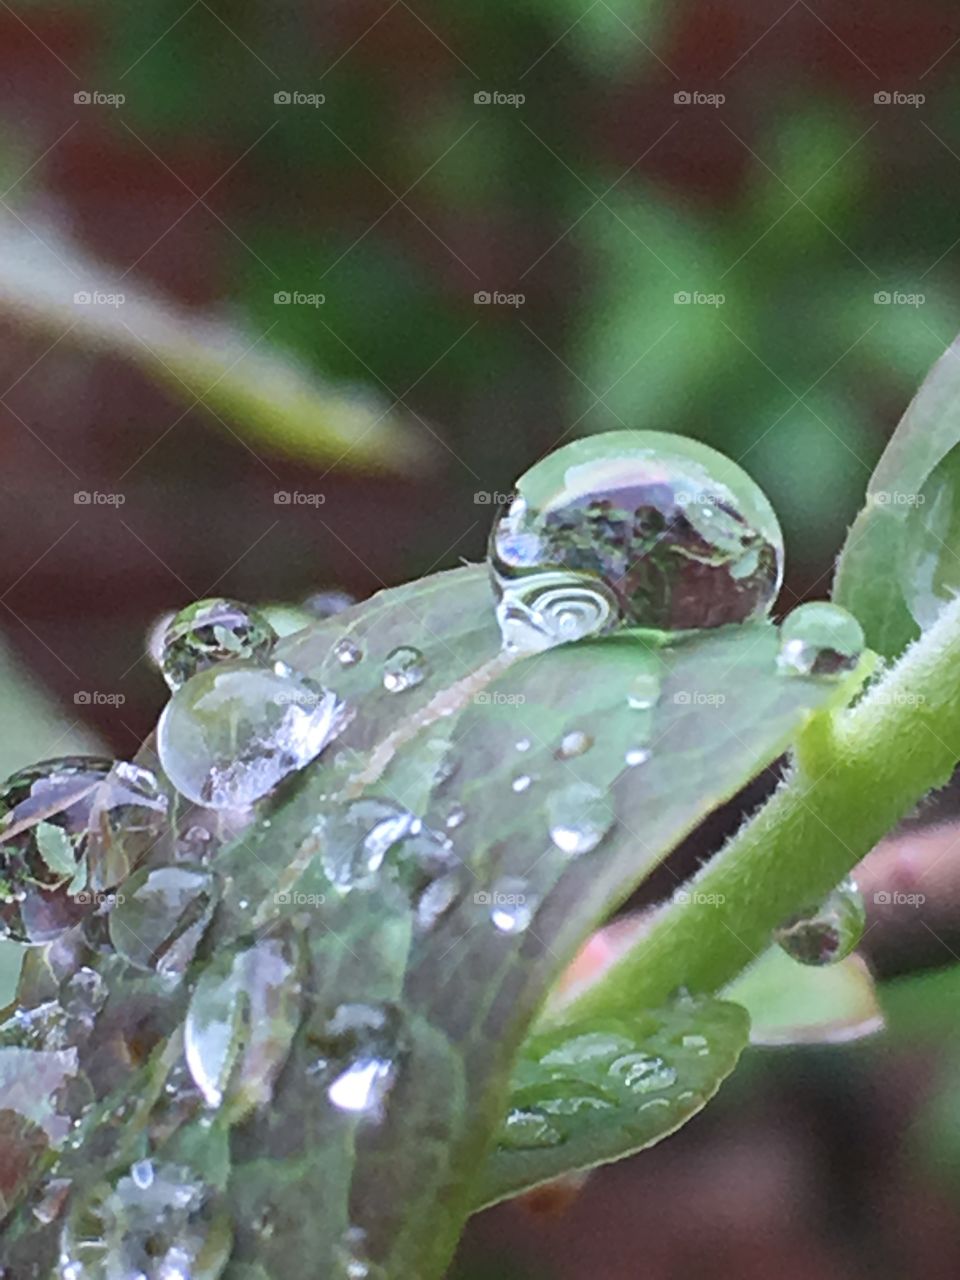 Raindrops gather heavily to balance quite precariously on our delicate spring growth.